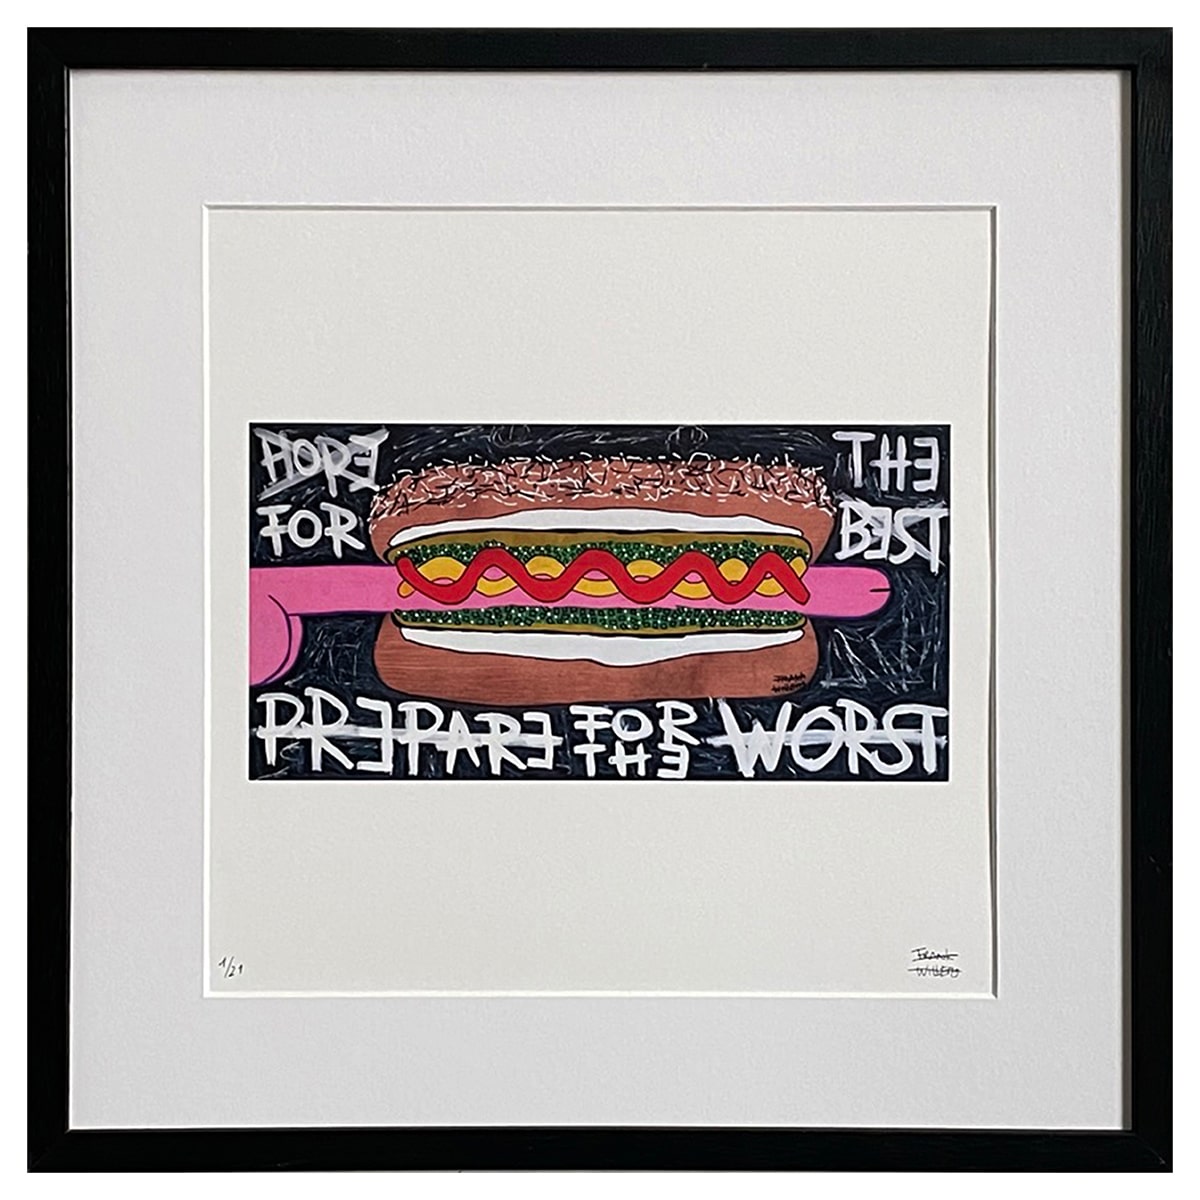 Limited Edt. Art Print – HOPE FOR THE BEST, PREPARE FOR THE WORST